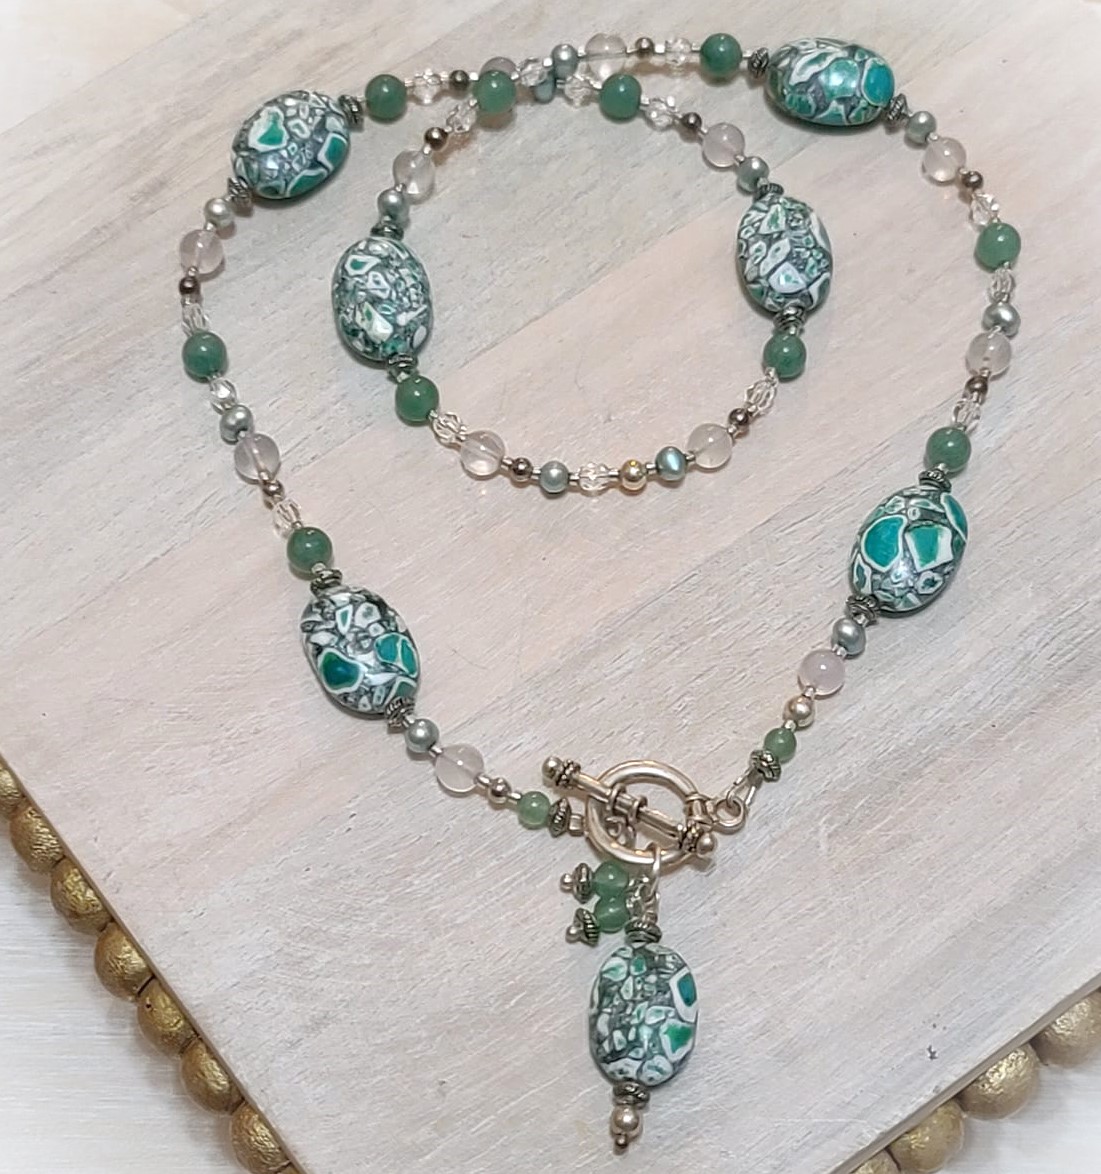 Jade gemstone lariat necklace, with pearls and crystals